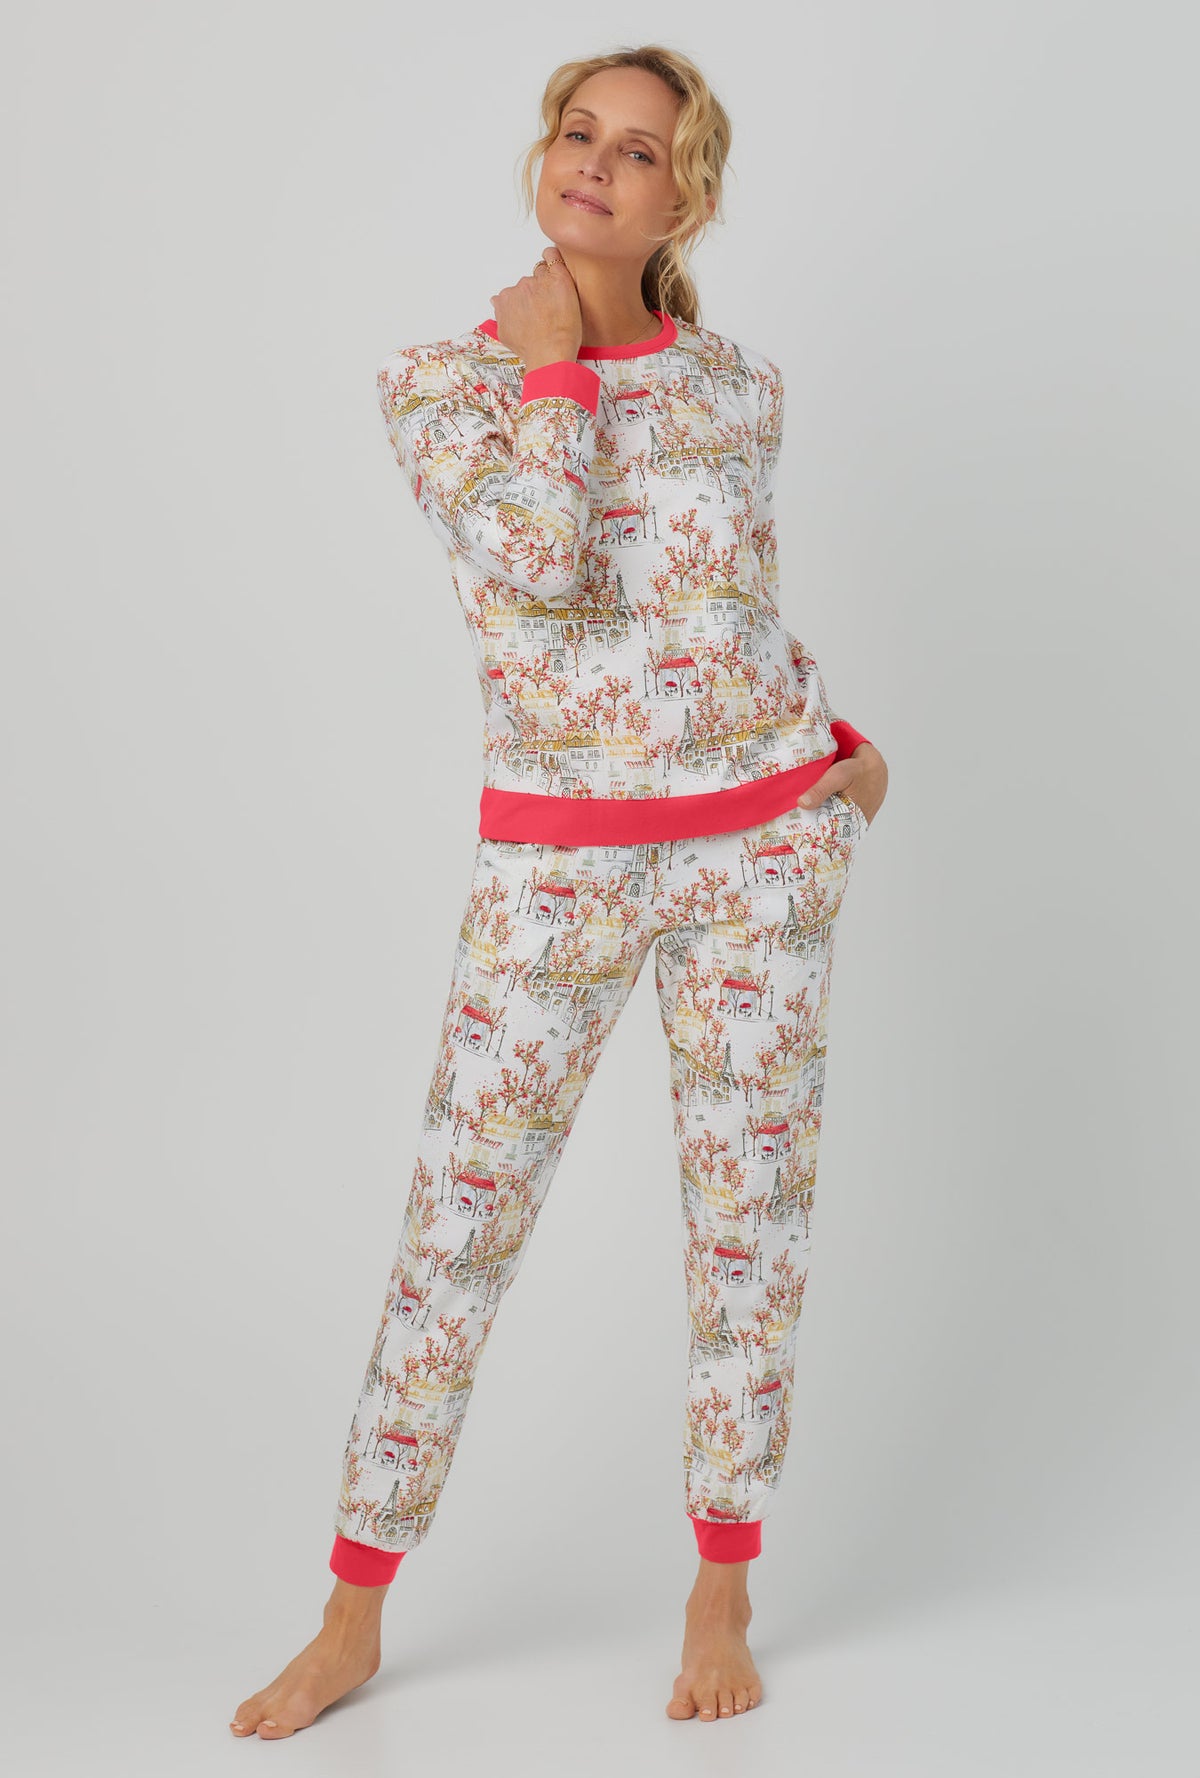 A lady wearing Long Sleeve Pullover Crew and Jogger Stretch Jersey PJ Set with fall in paris print.